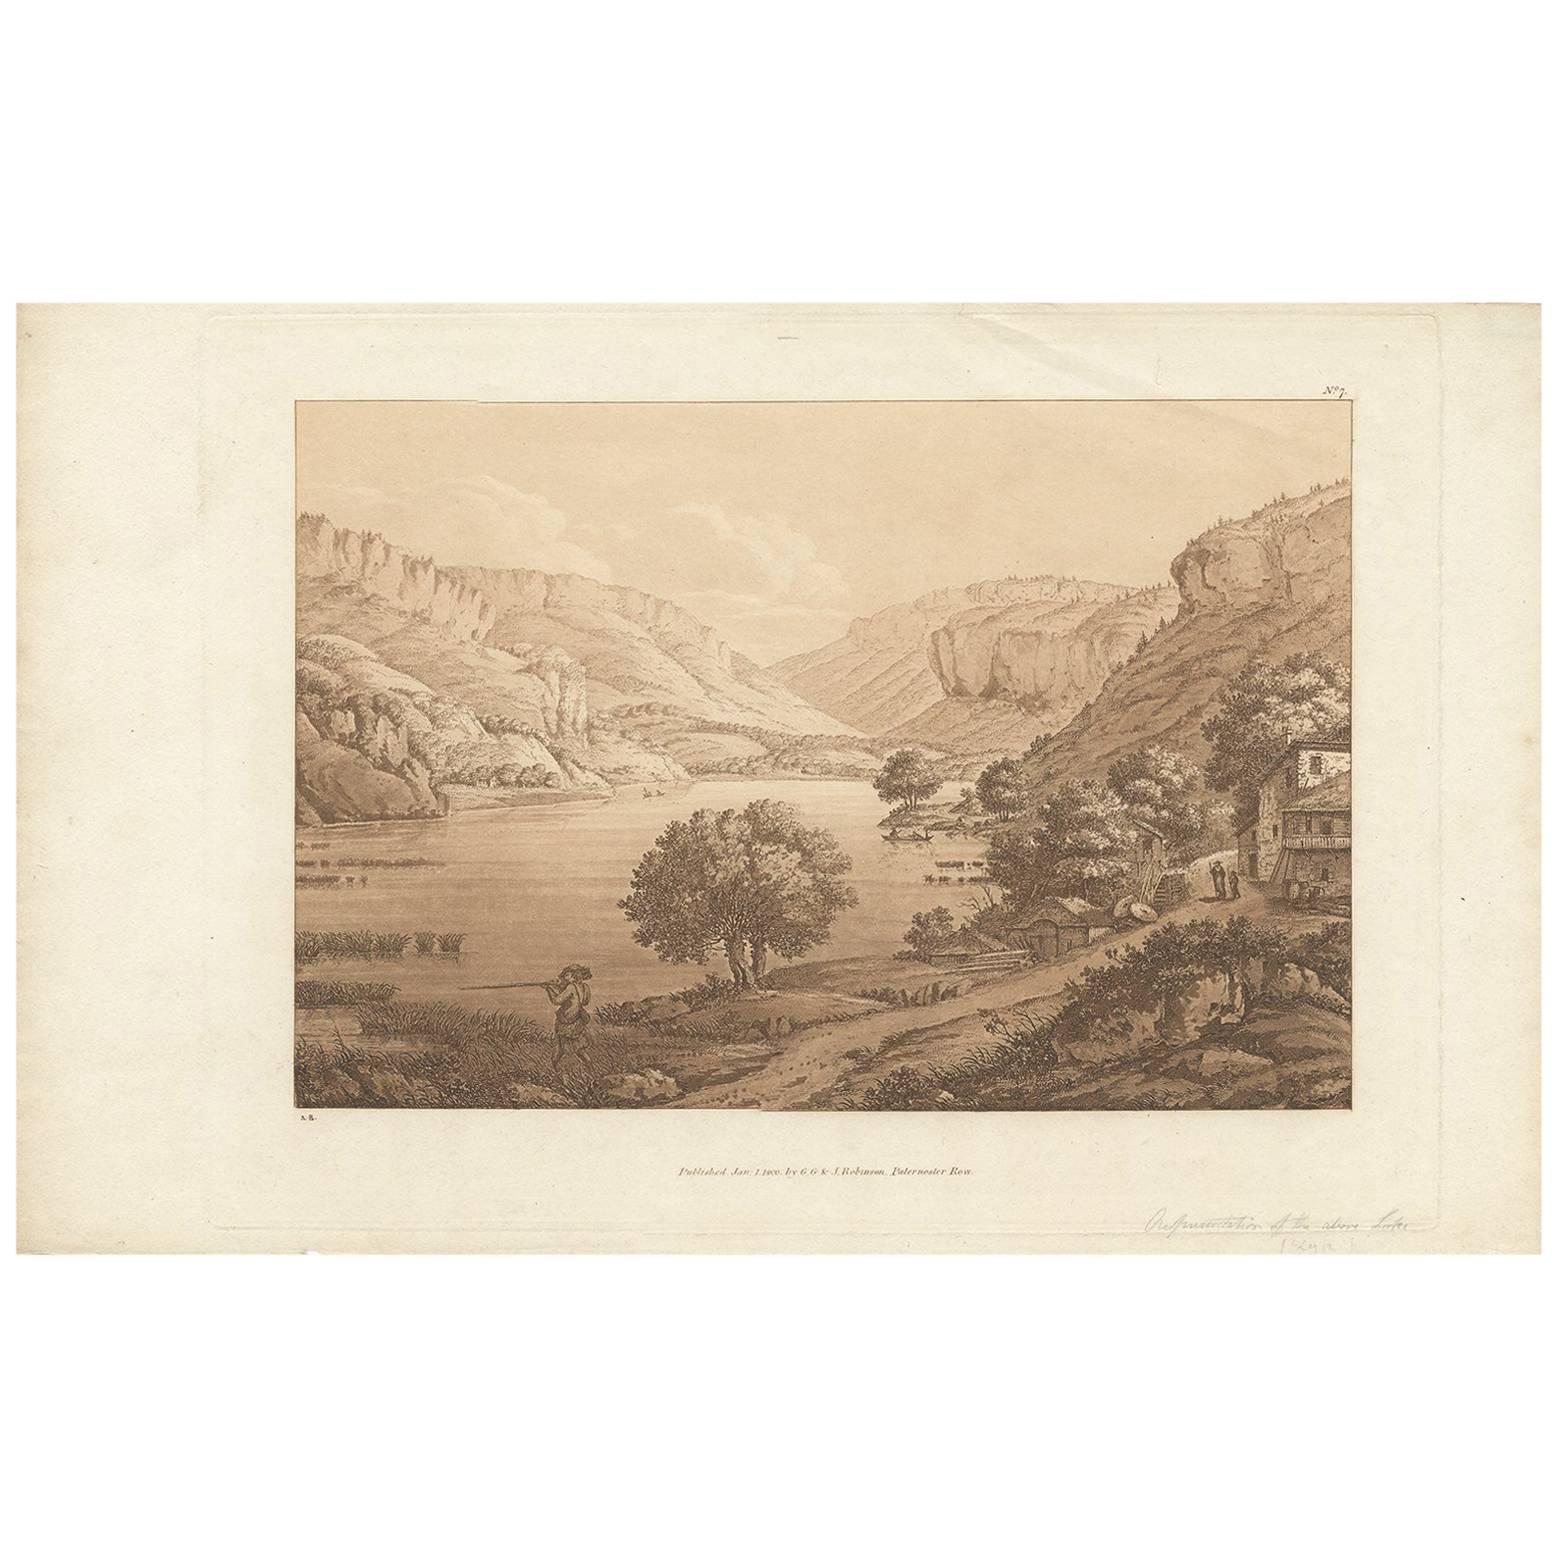 Antique Print of a Village in Switzerland by J. Robinson, 1800